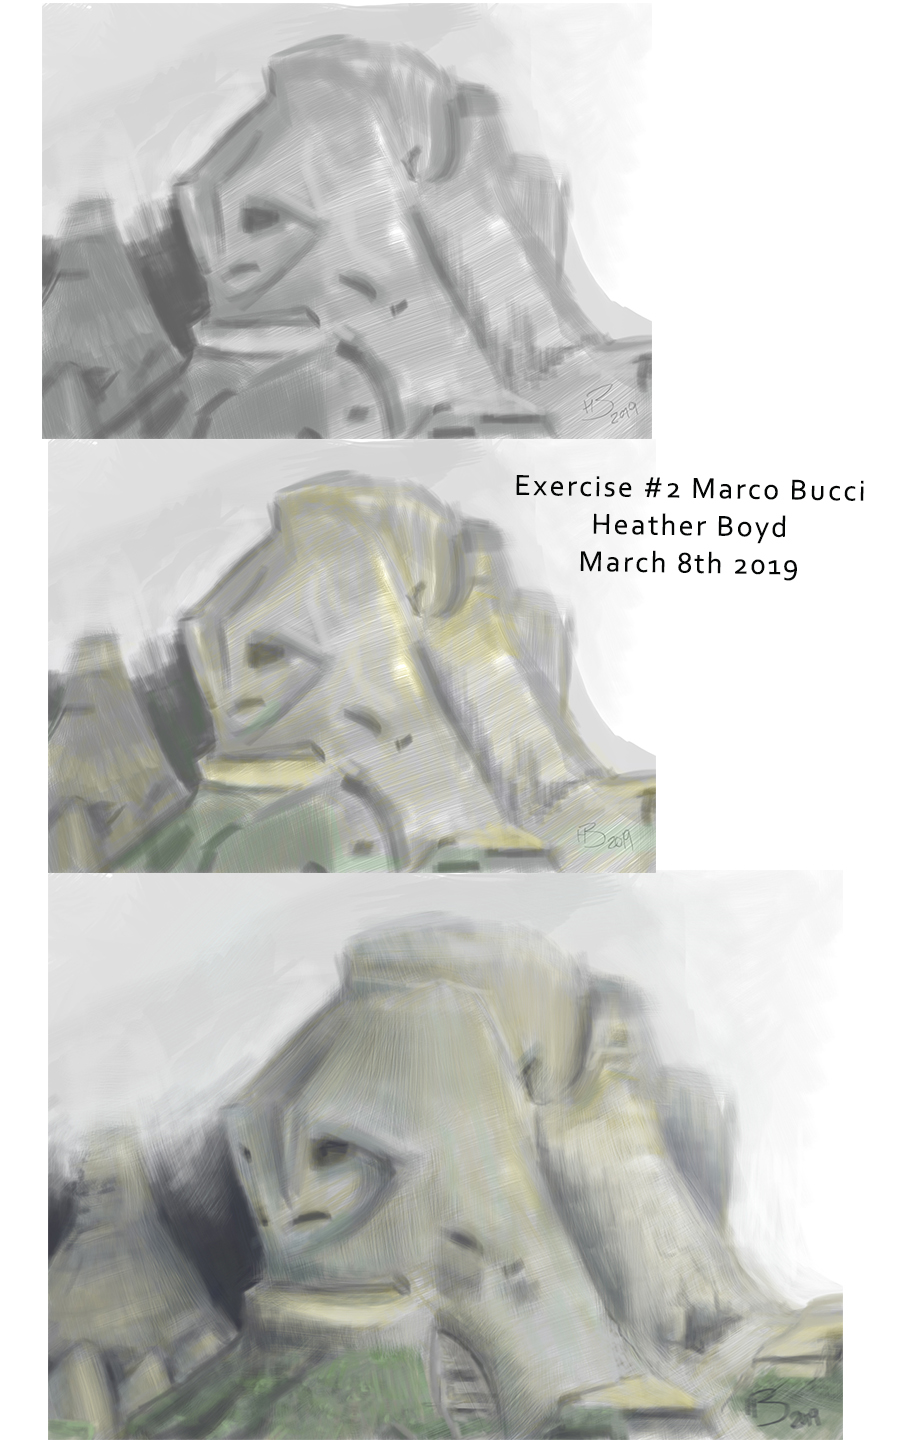 Exercise #2 Marco Bucci Share.jpg